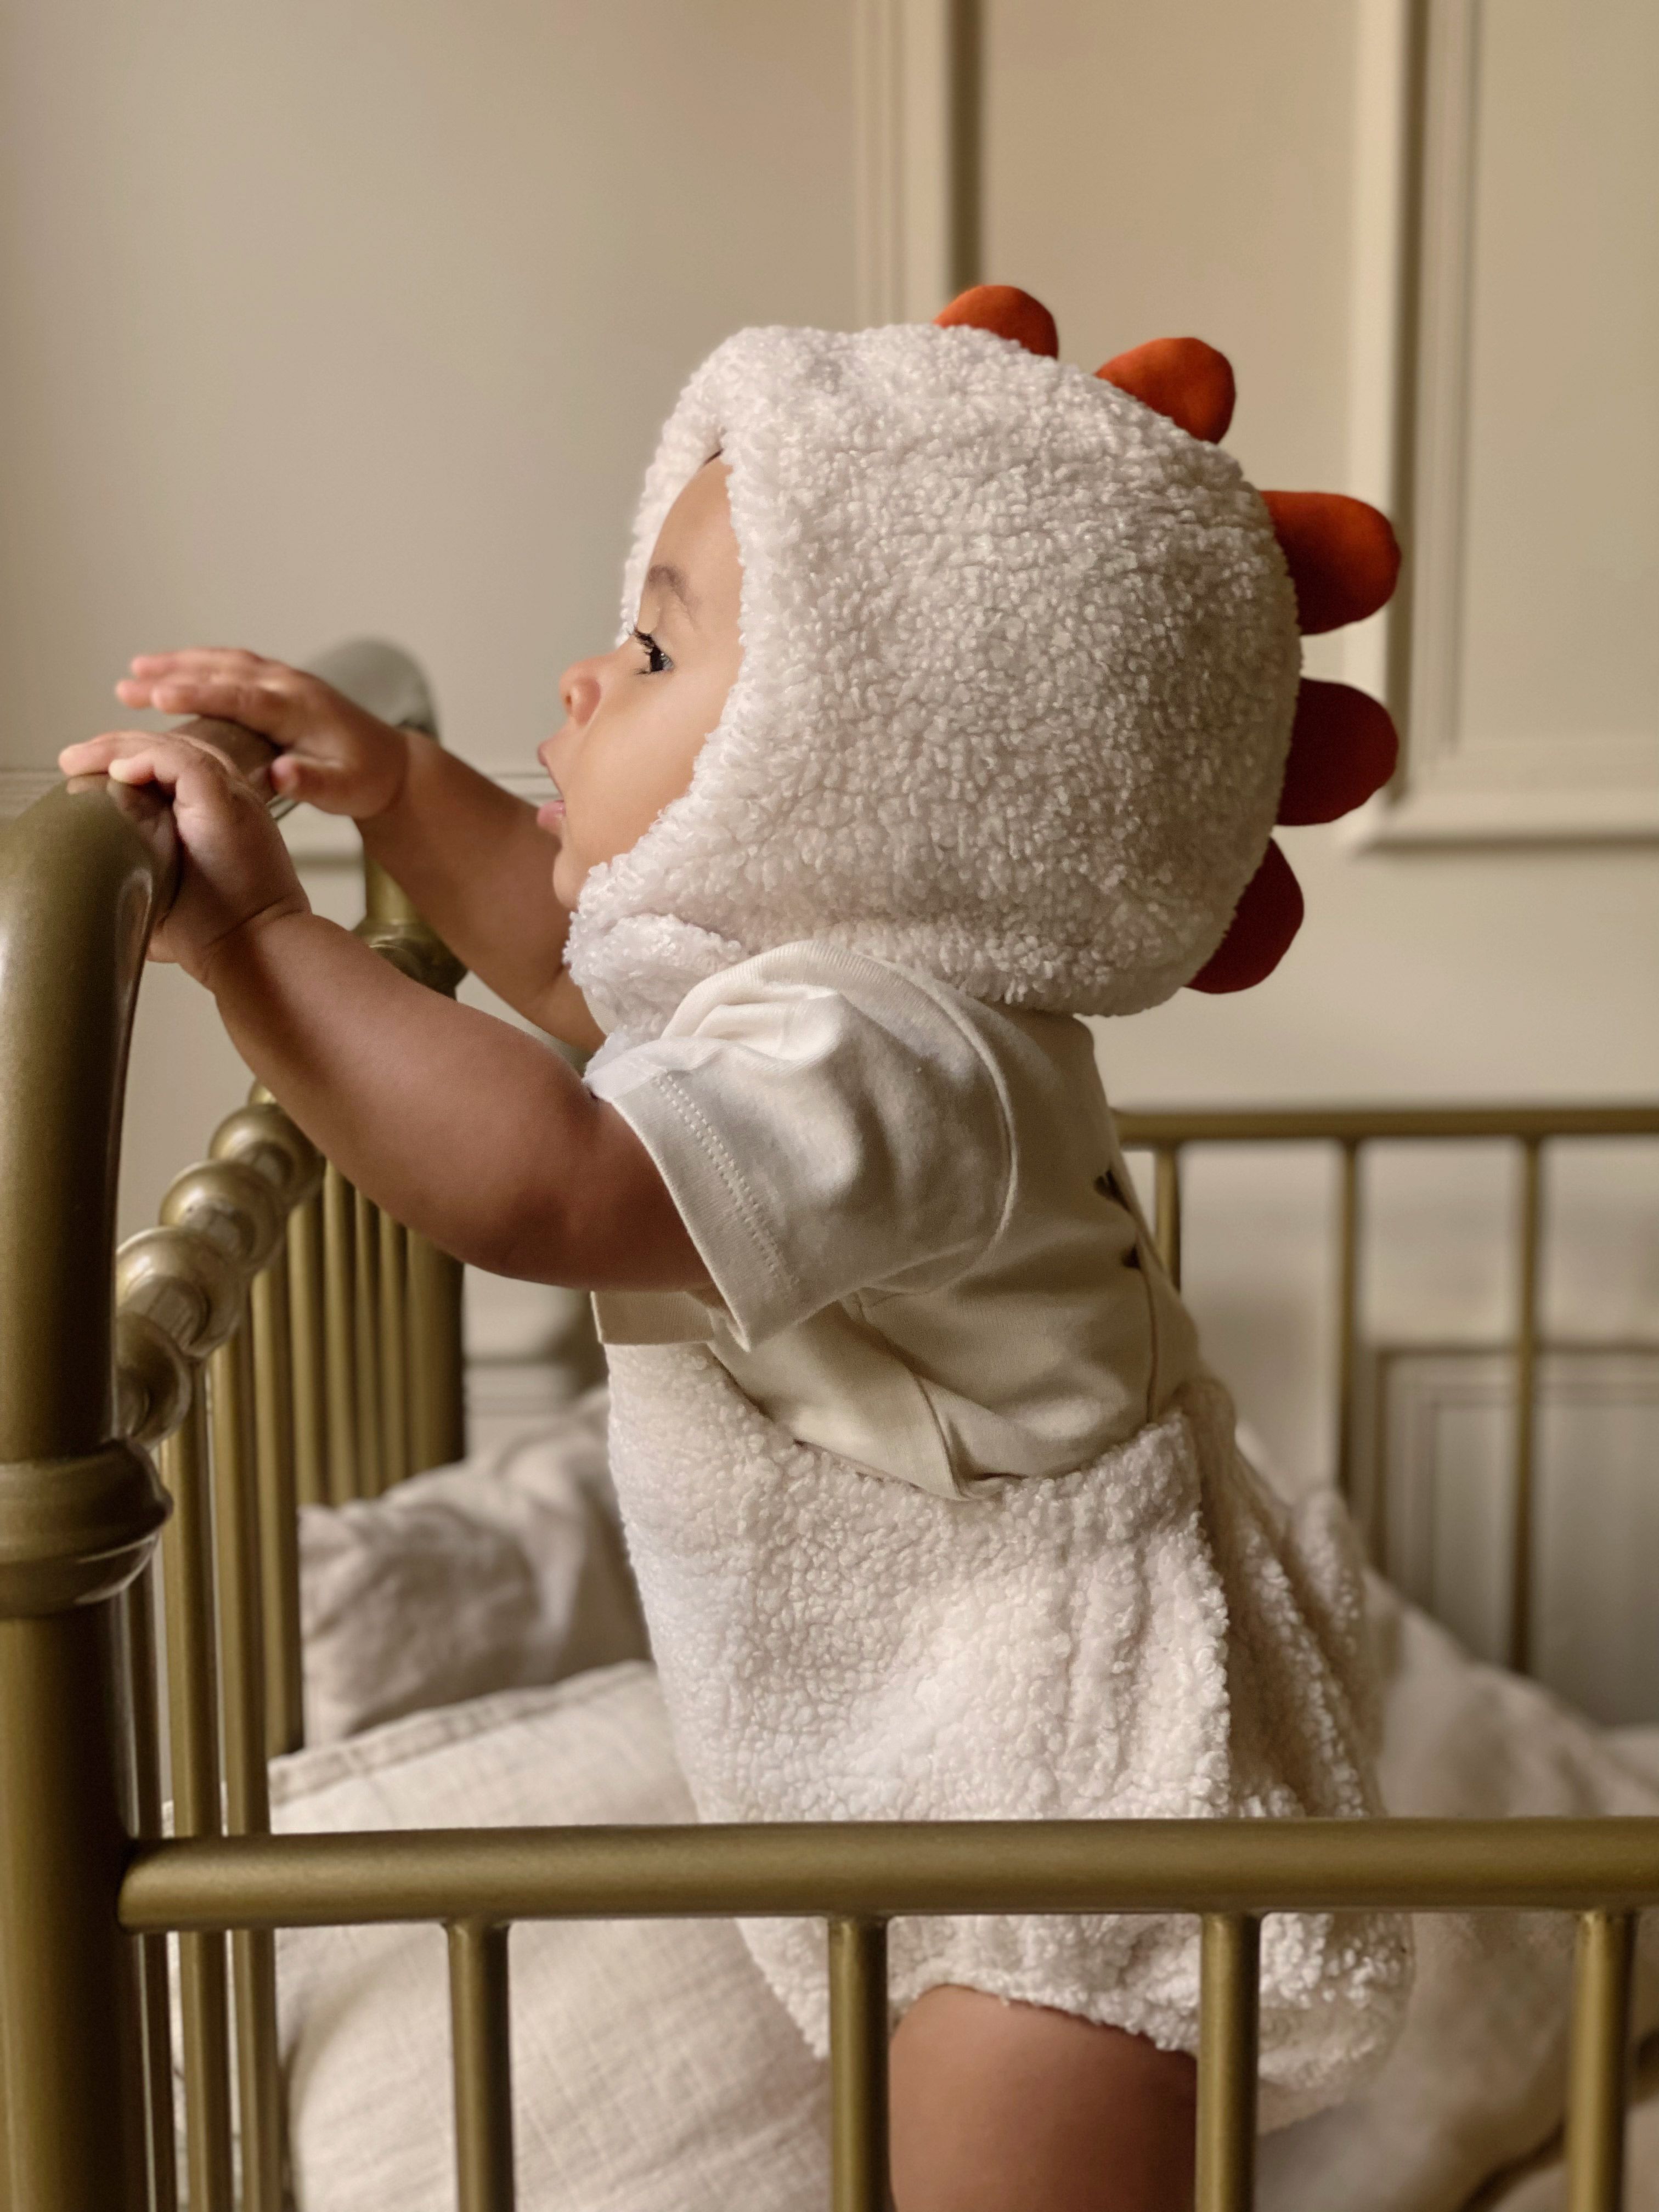 Baby in cot, standing up wearing Easter outfit